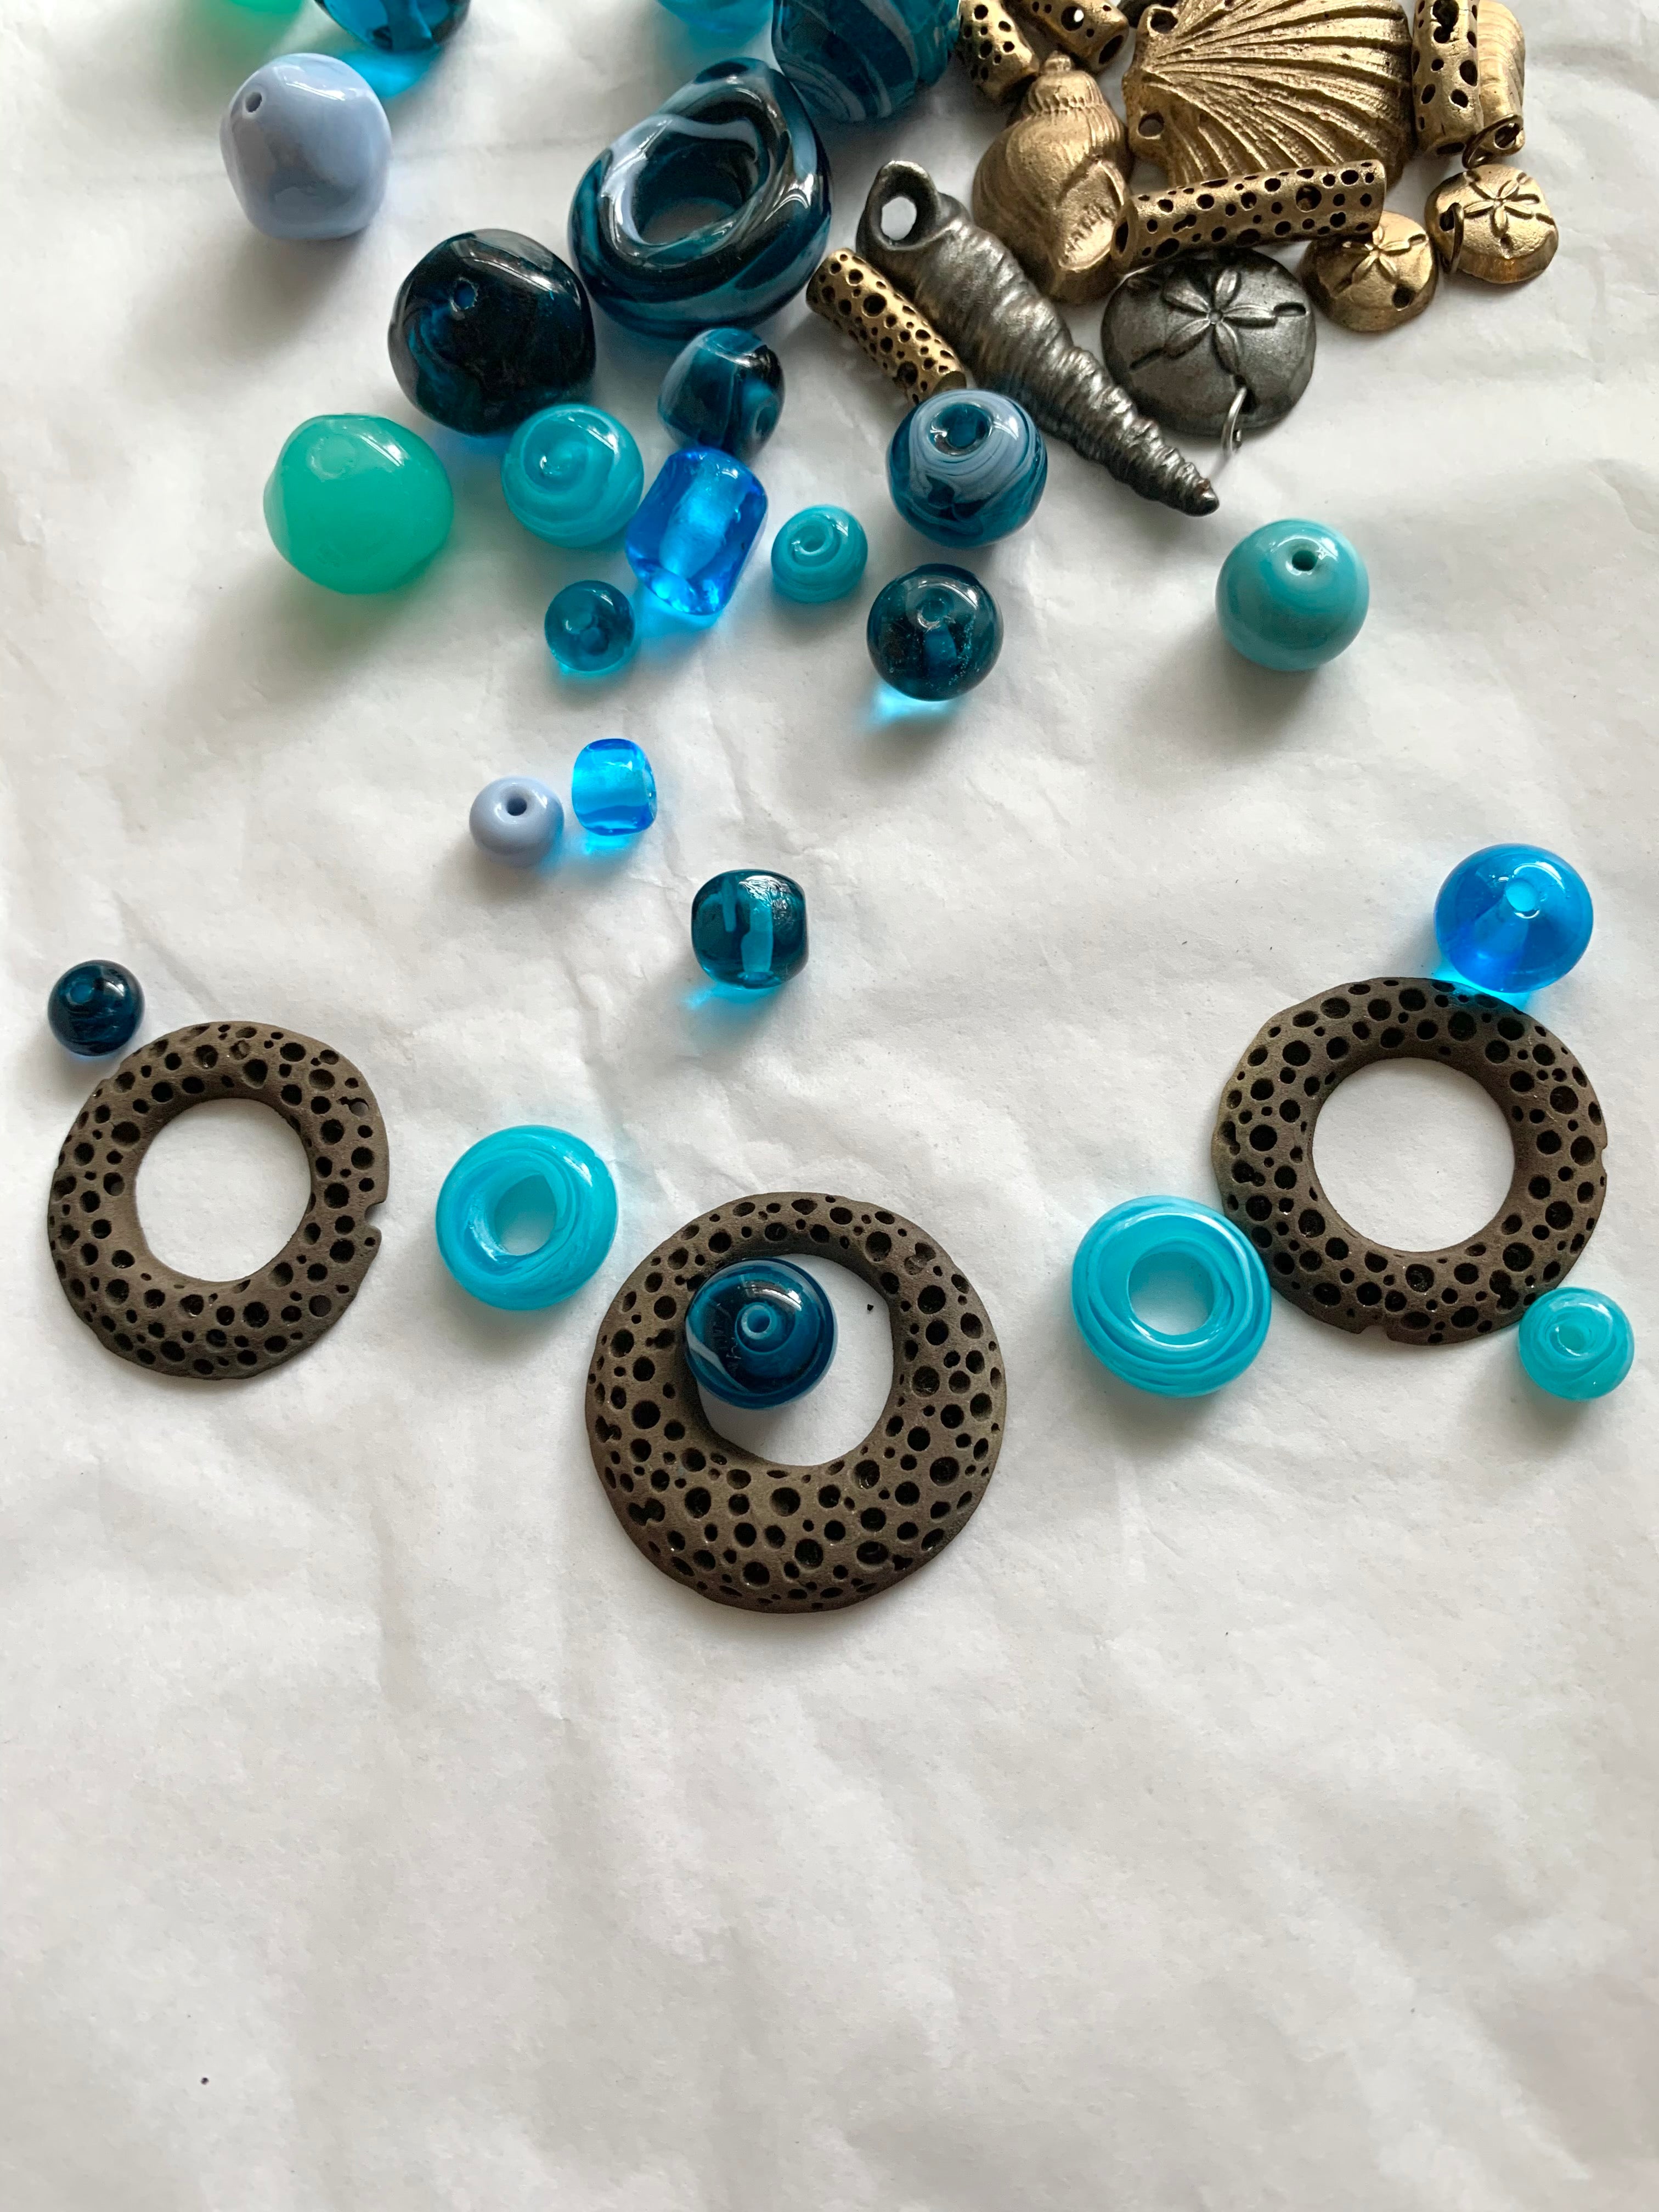 Blue glass artisan made beads with unfinished bronze rings for necklace